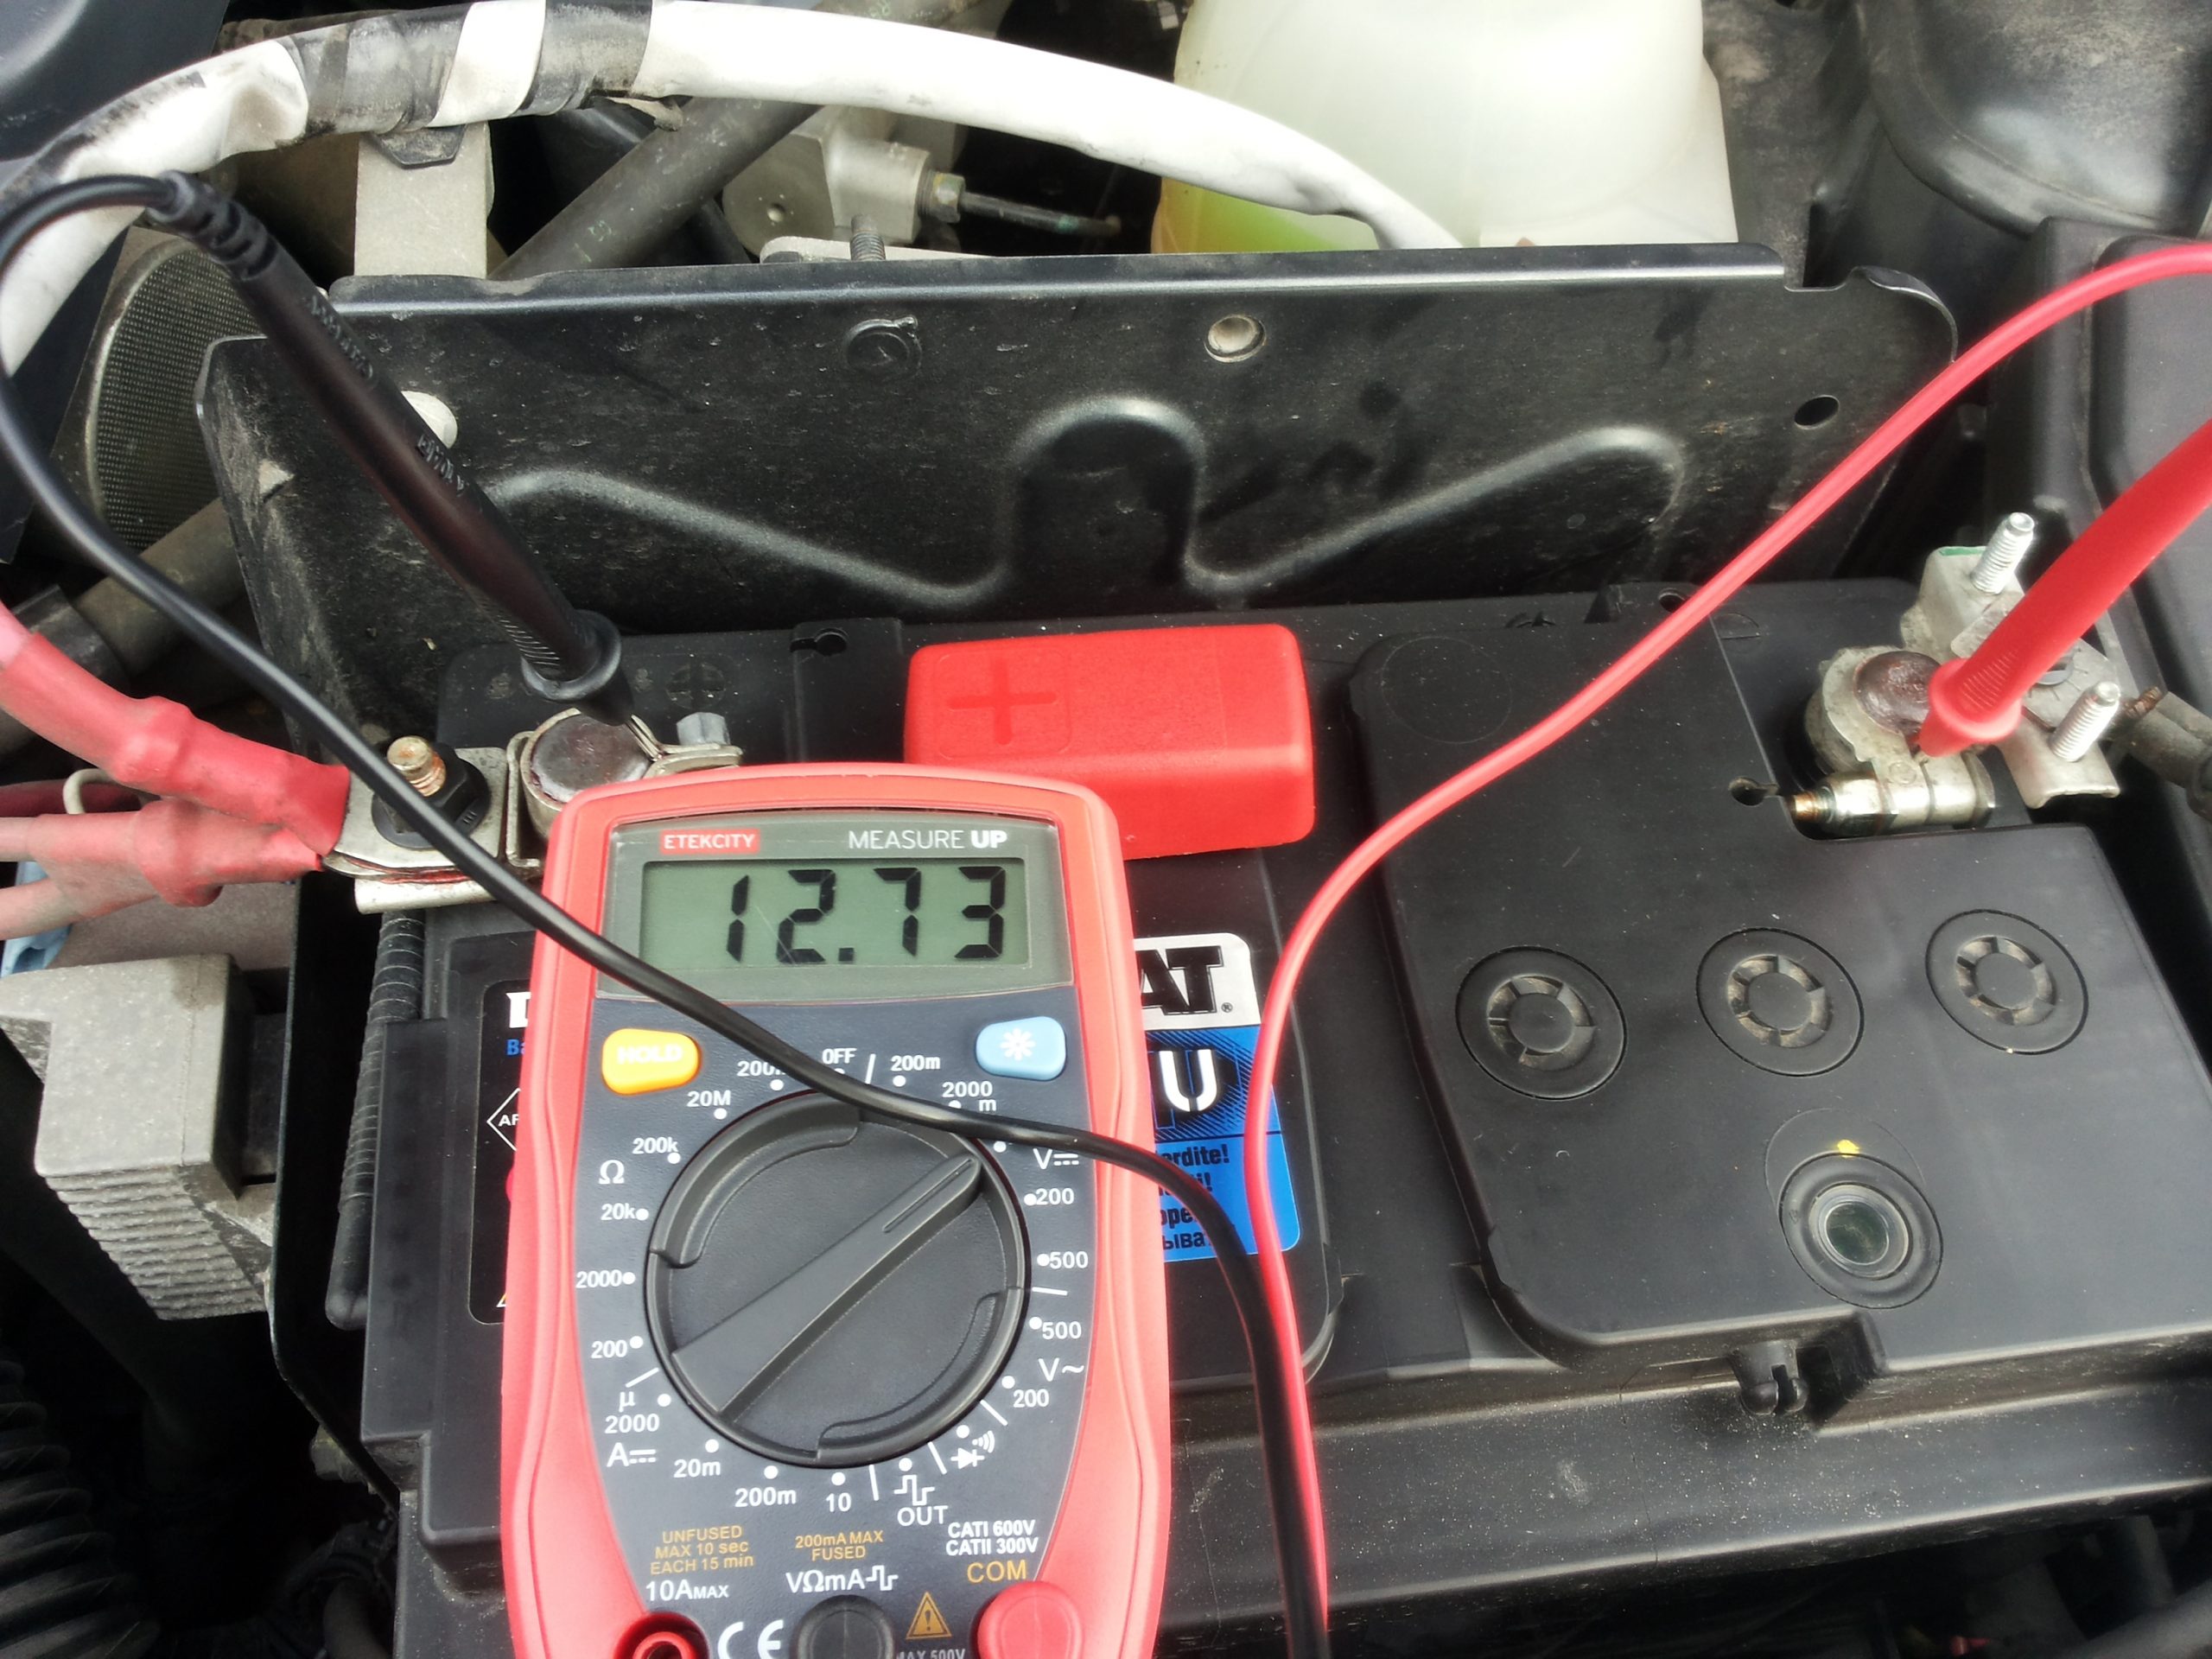 How to check your cars battery with a Digital Multimeter #FCDDIY#004